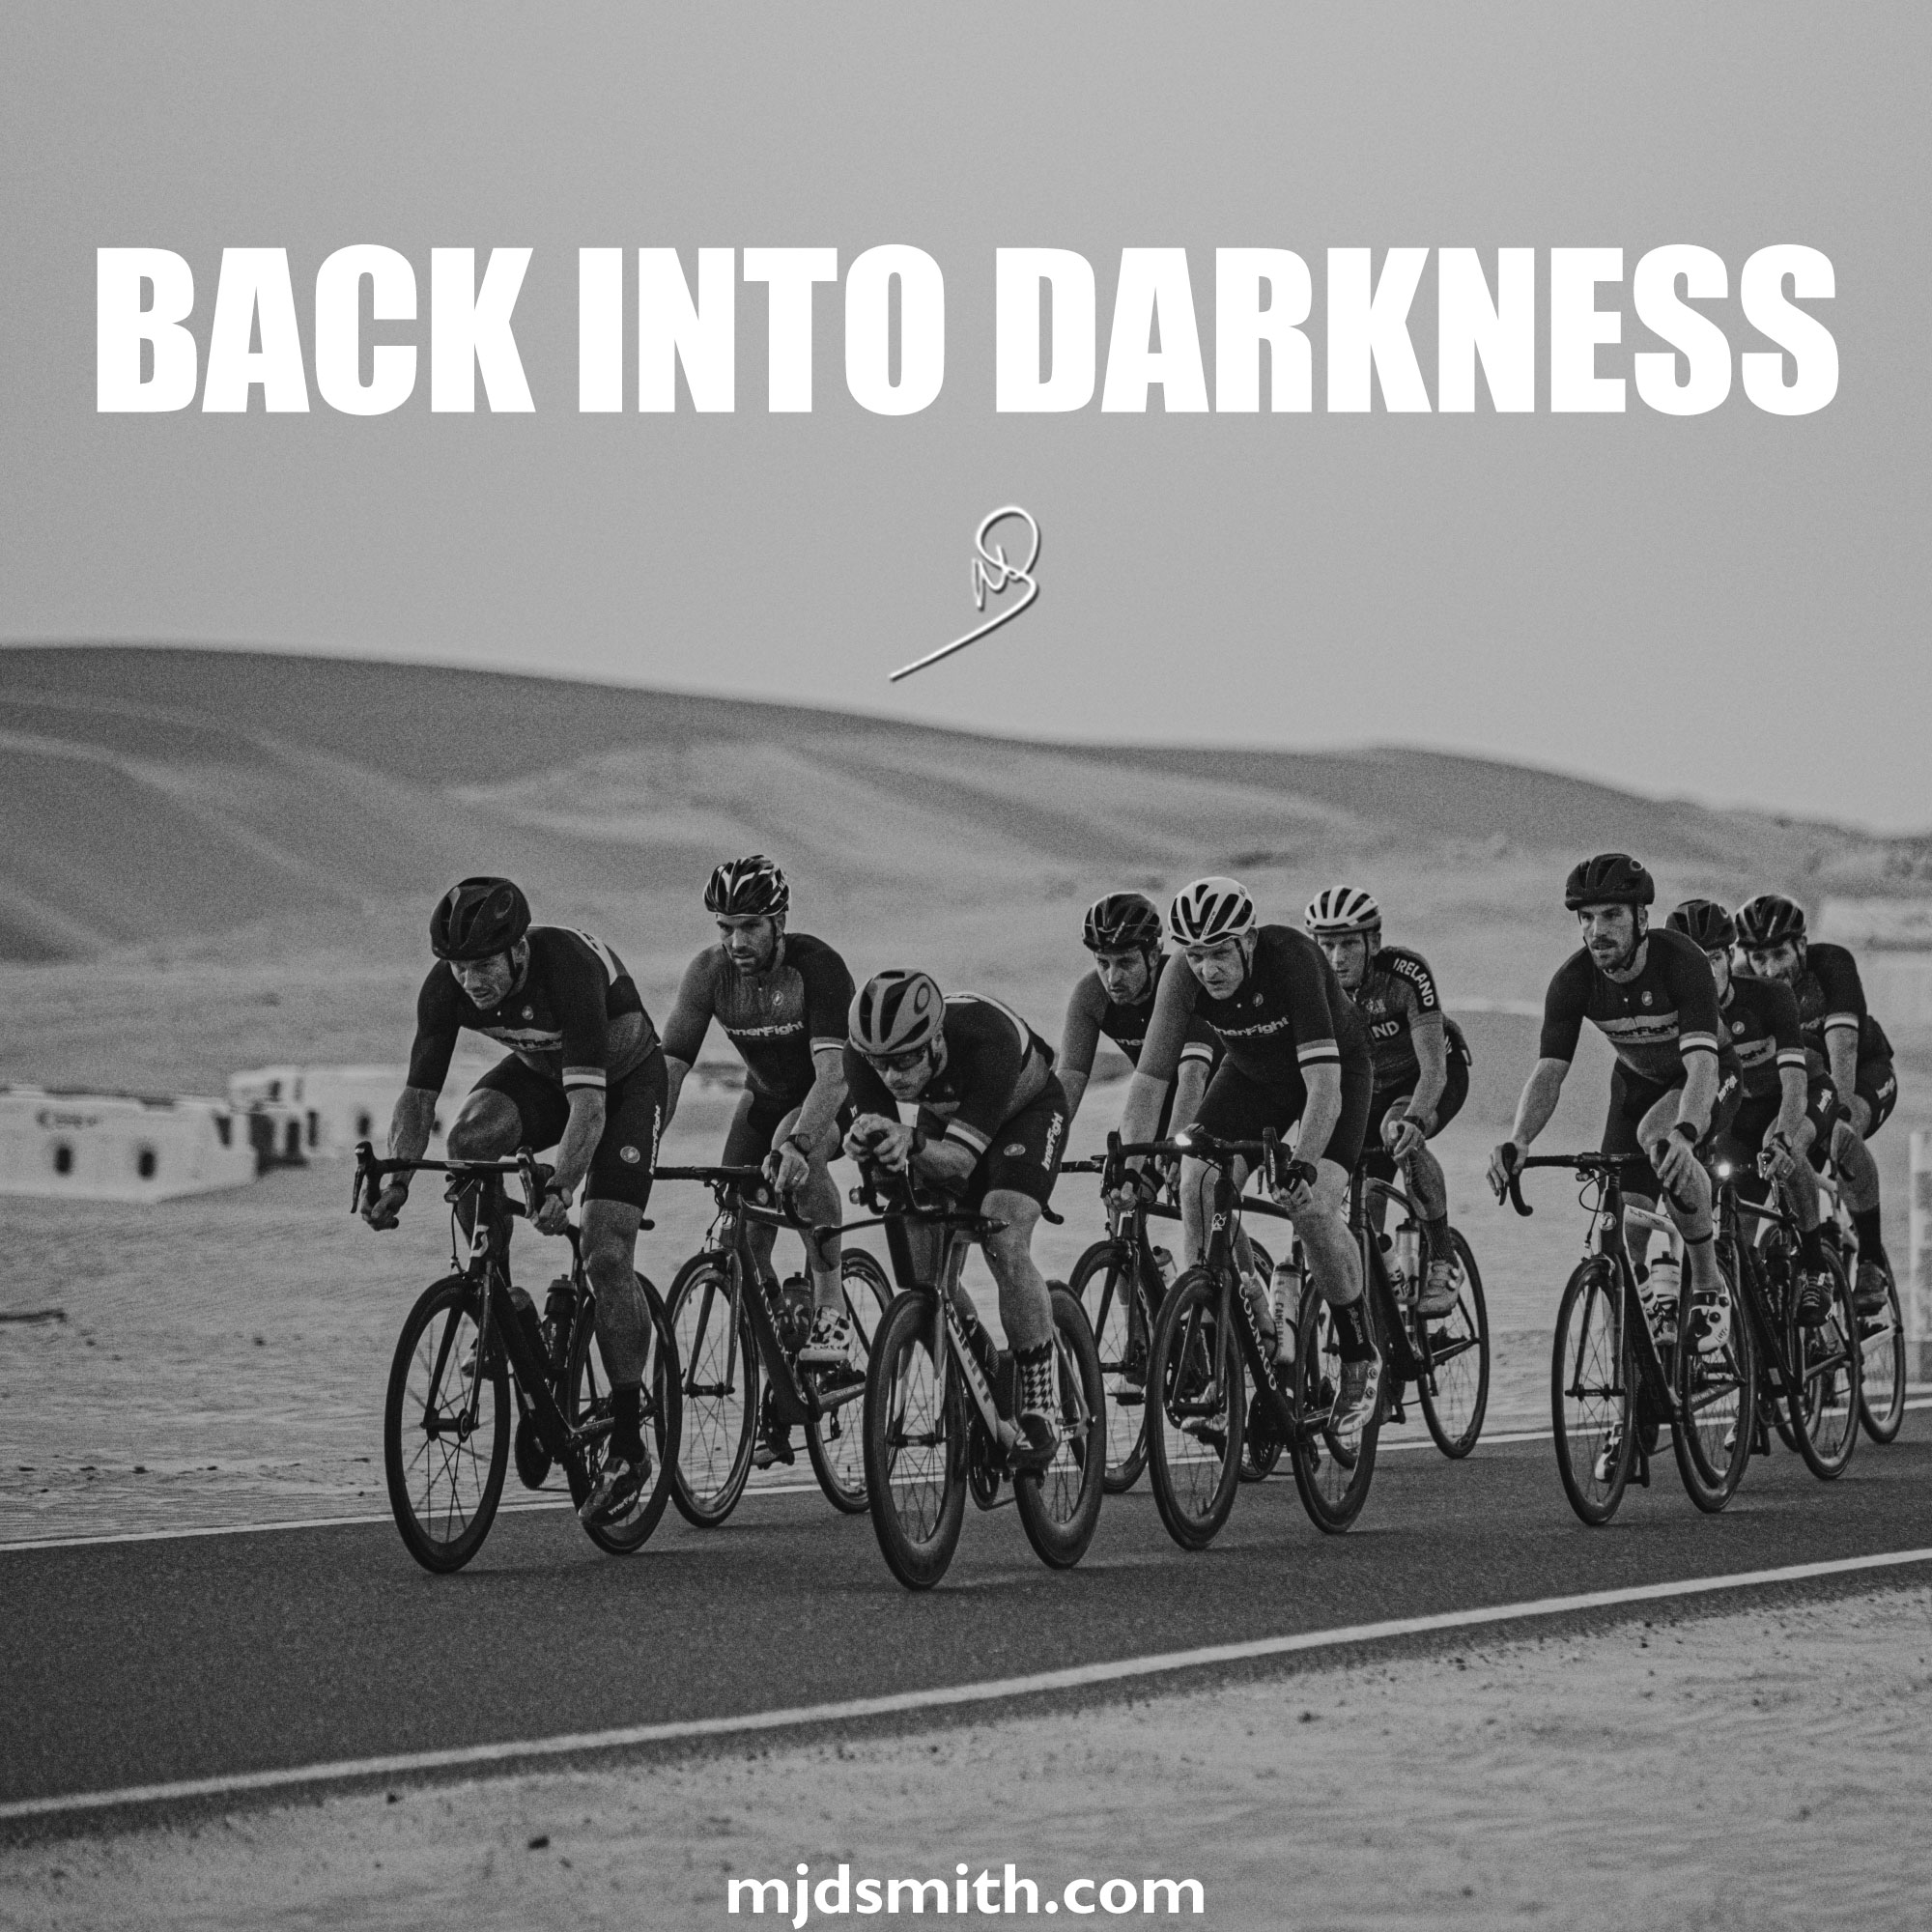 Back into the darkness